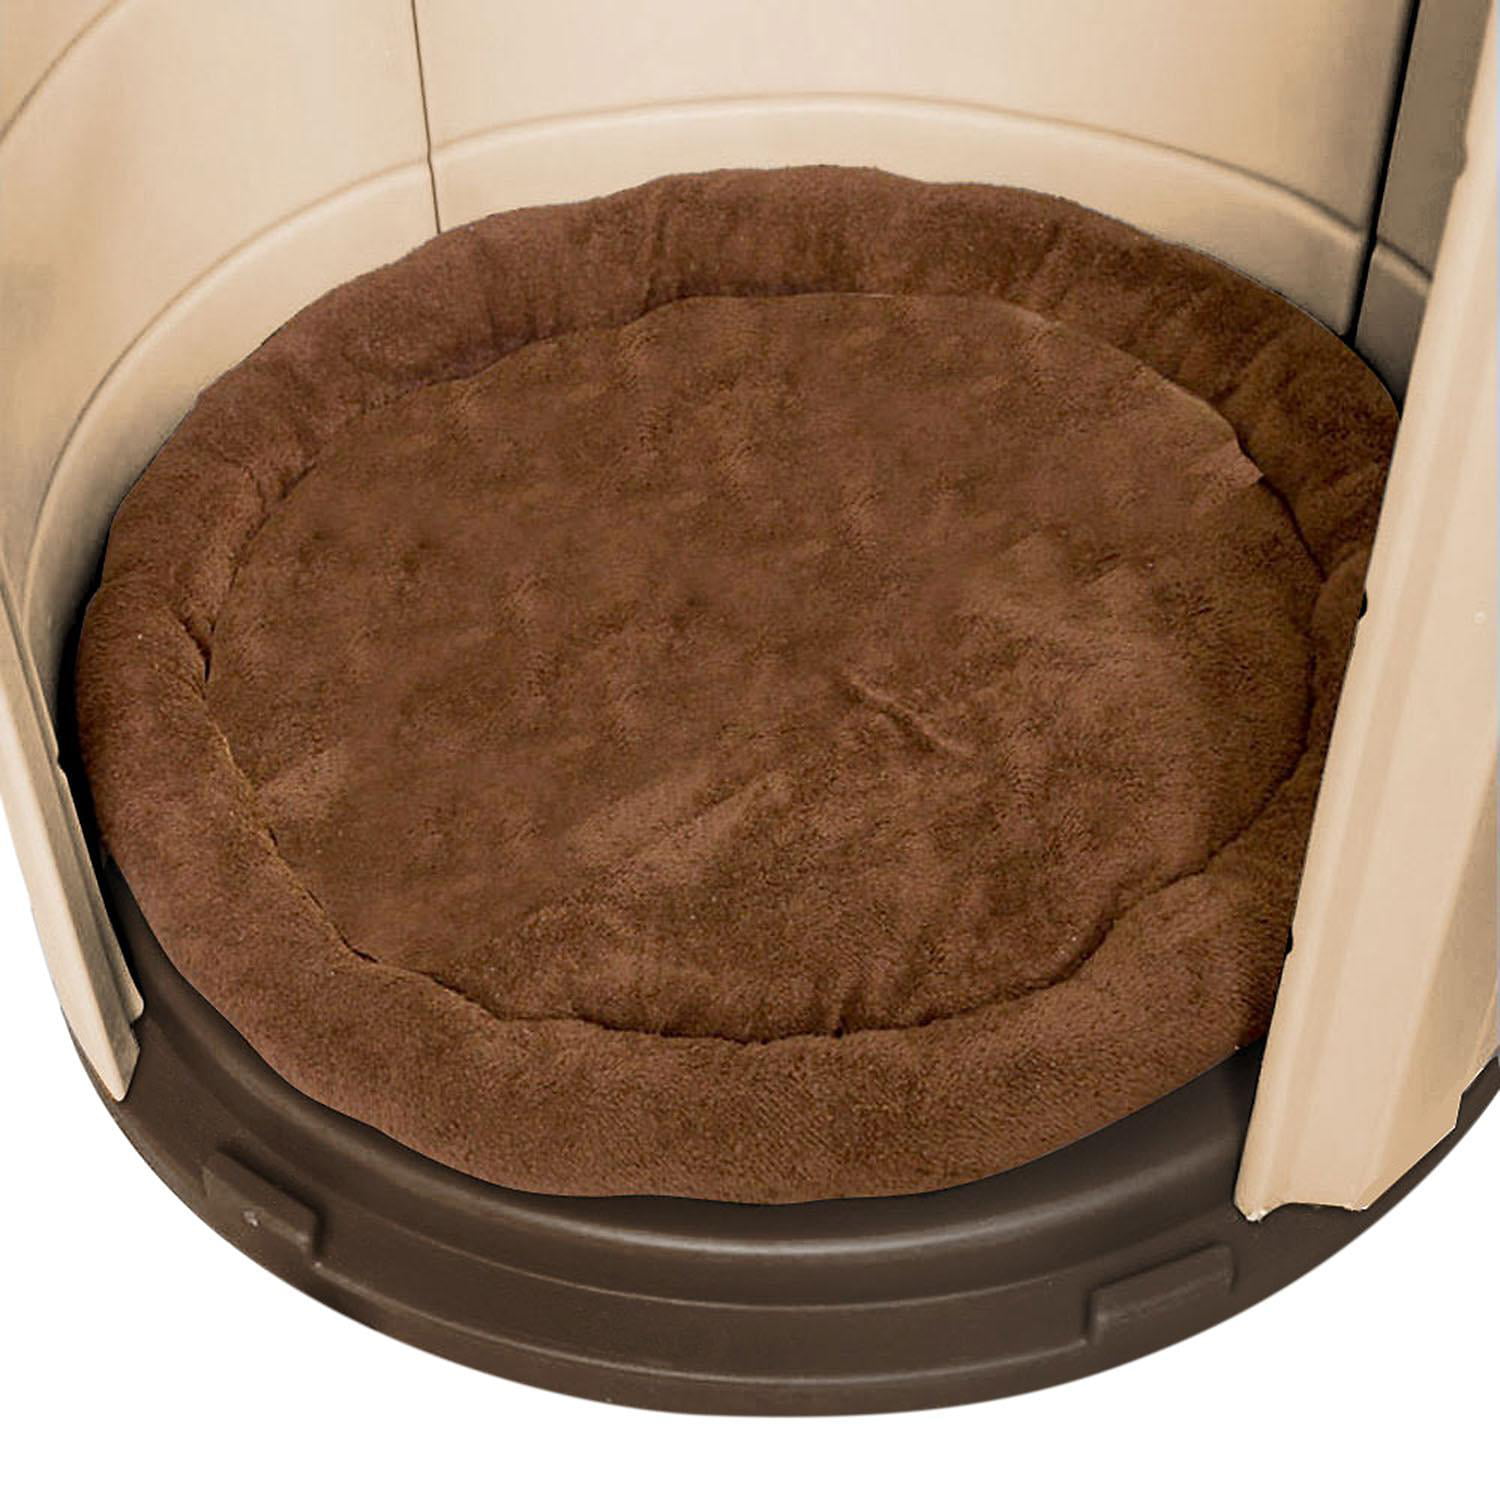 ASL Solutions DP Hunter Dog House with Floor Heater